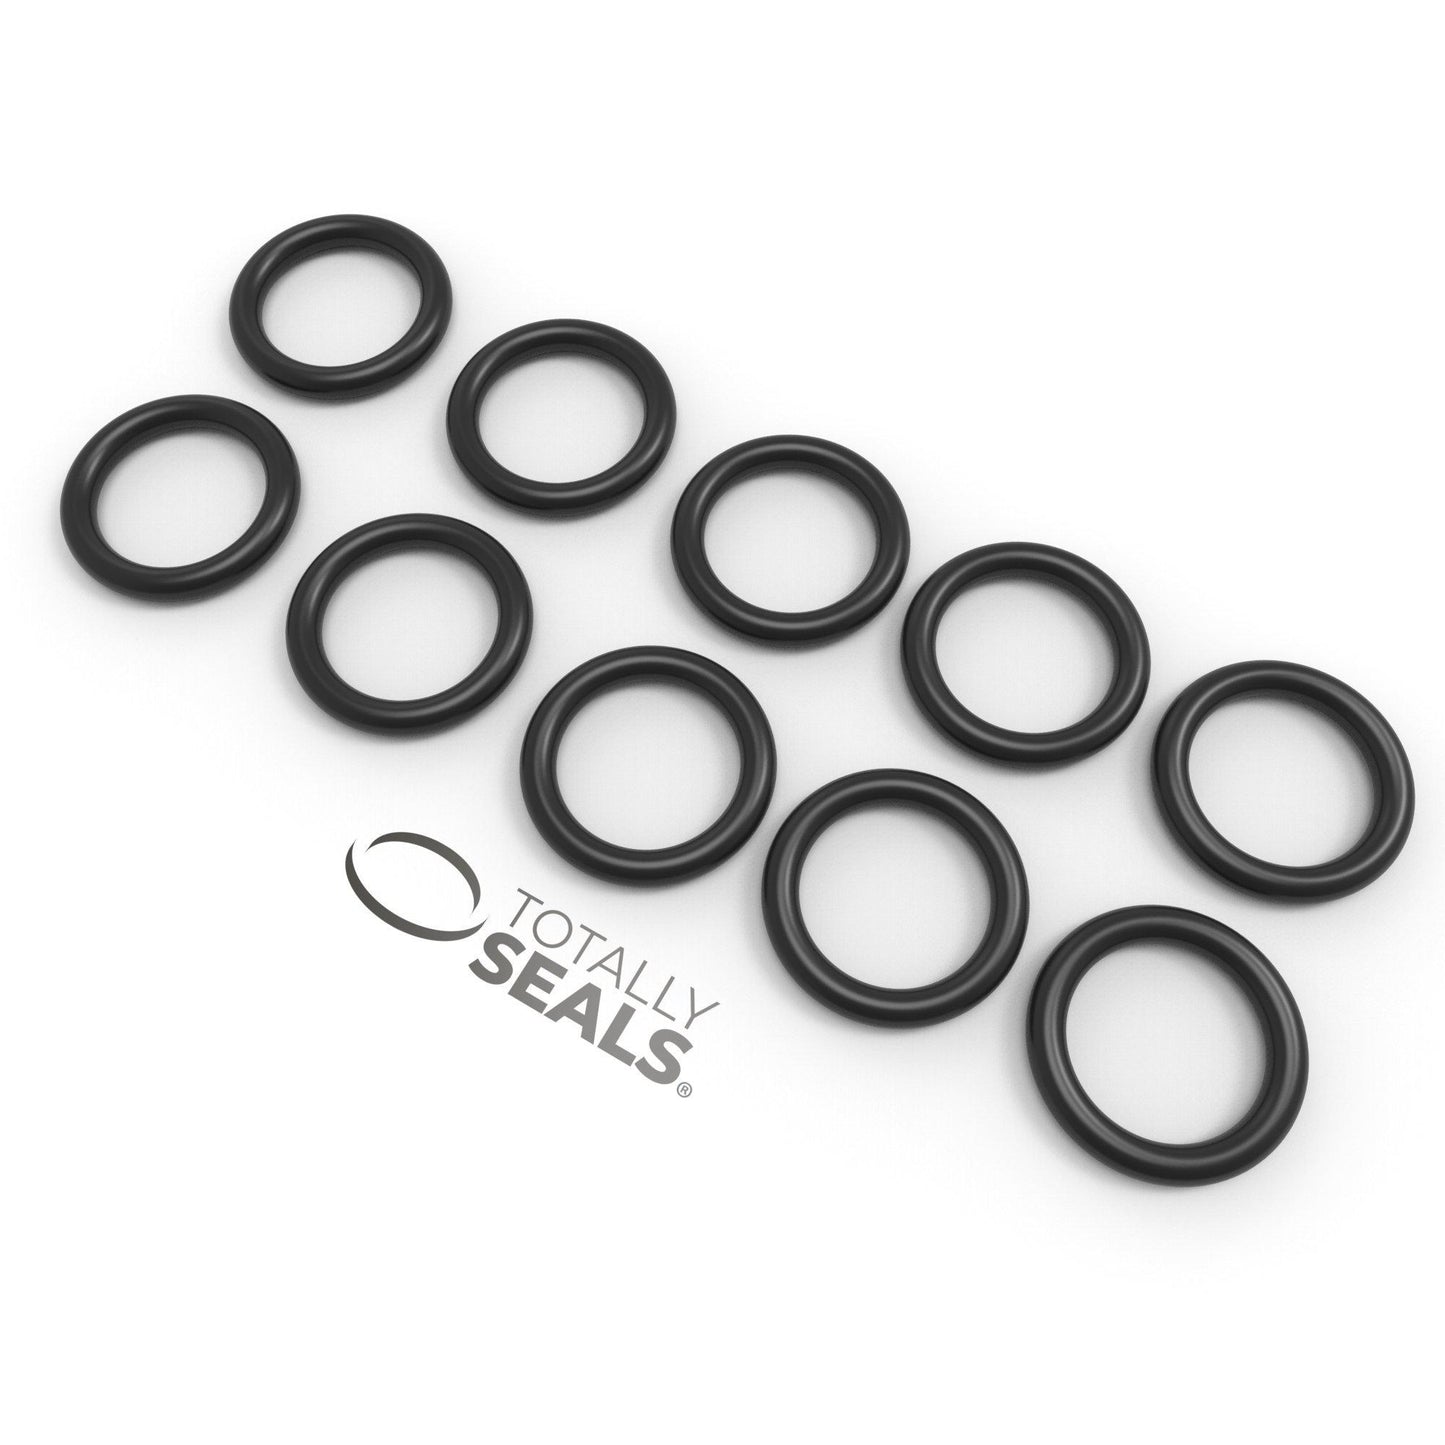 5mm x 1.5mm (8mm OD) Nitrile O-Rings - Totally Seals®